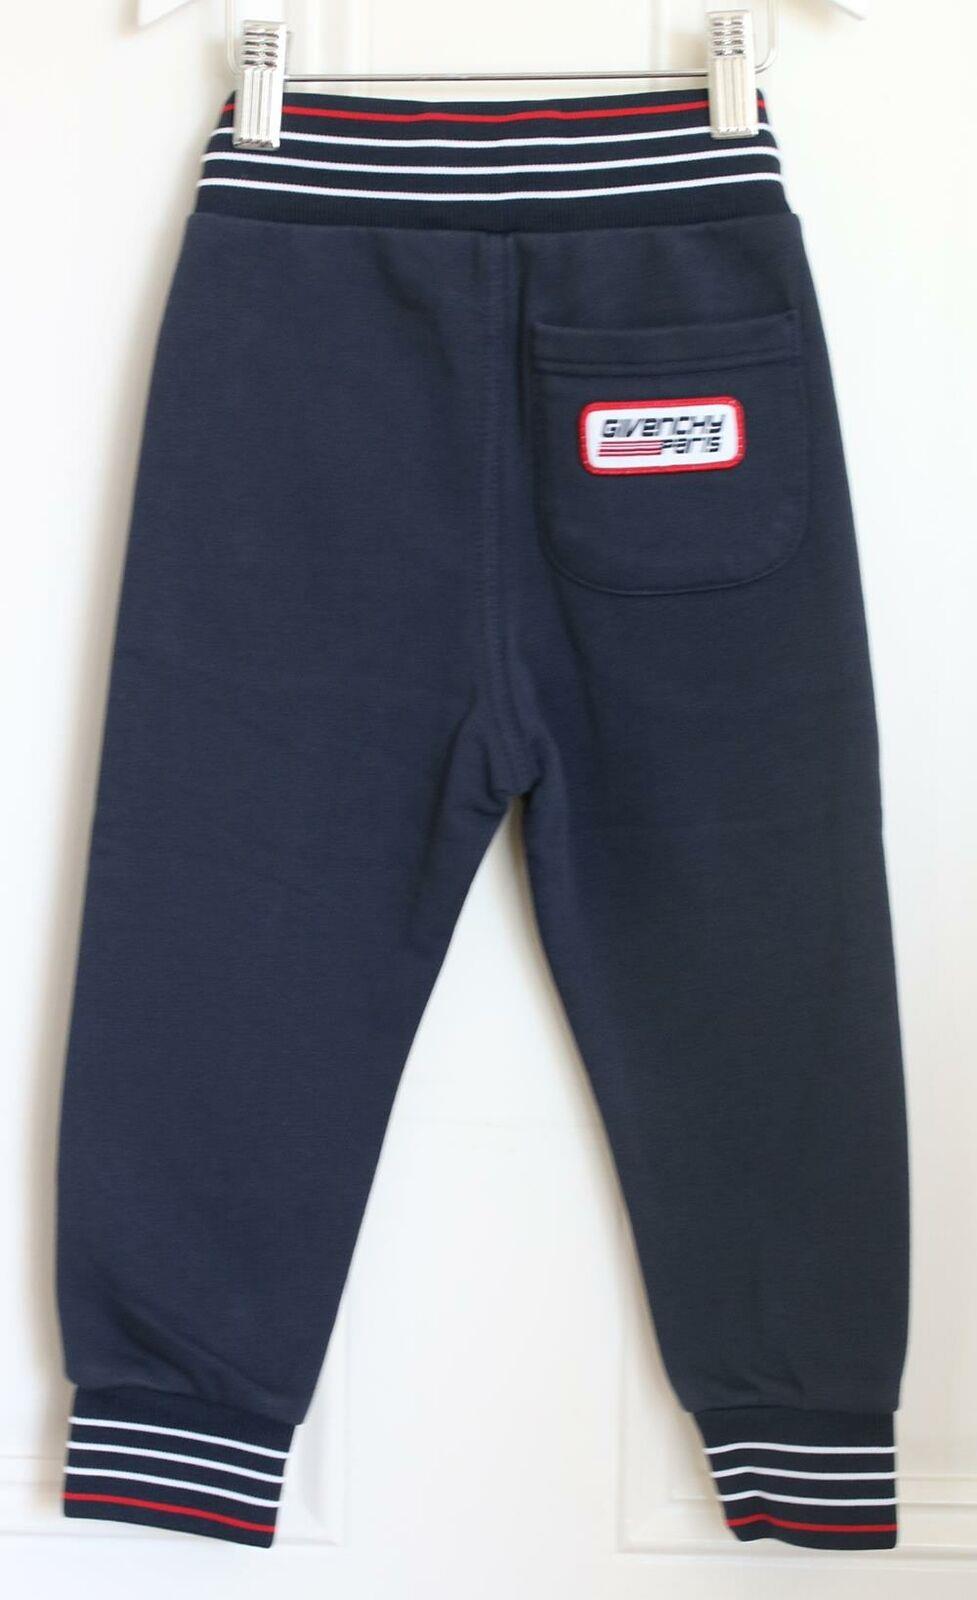 GIVENCHY KIDS BOYS COTTON TRACK PANTS 4 YEARS